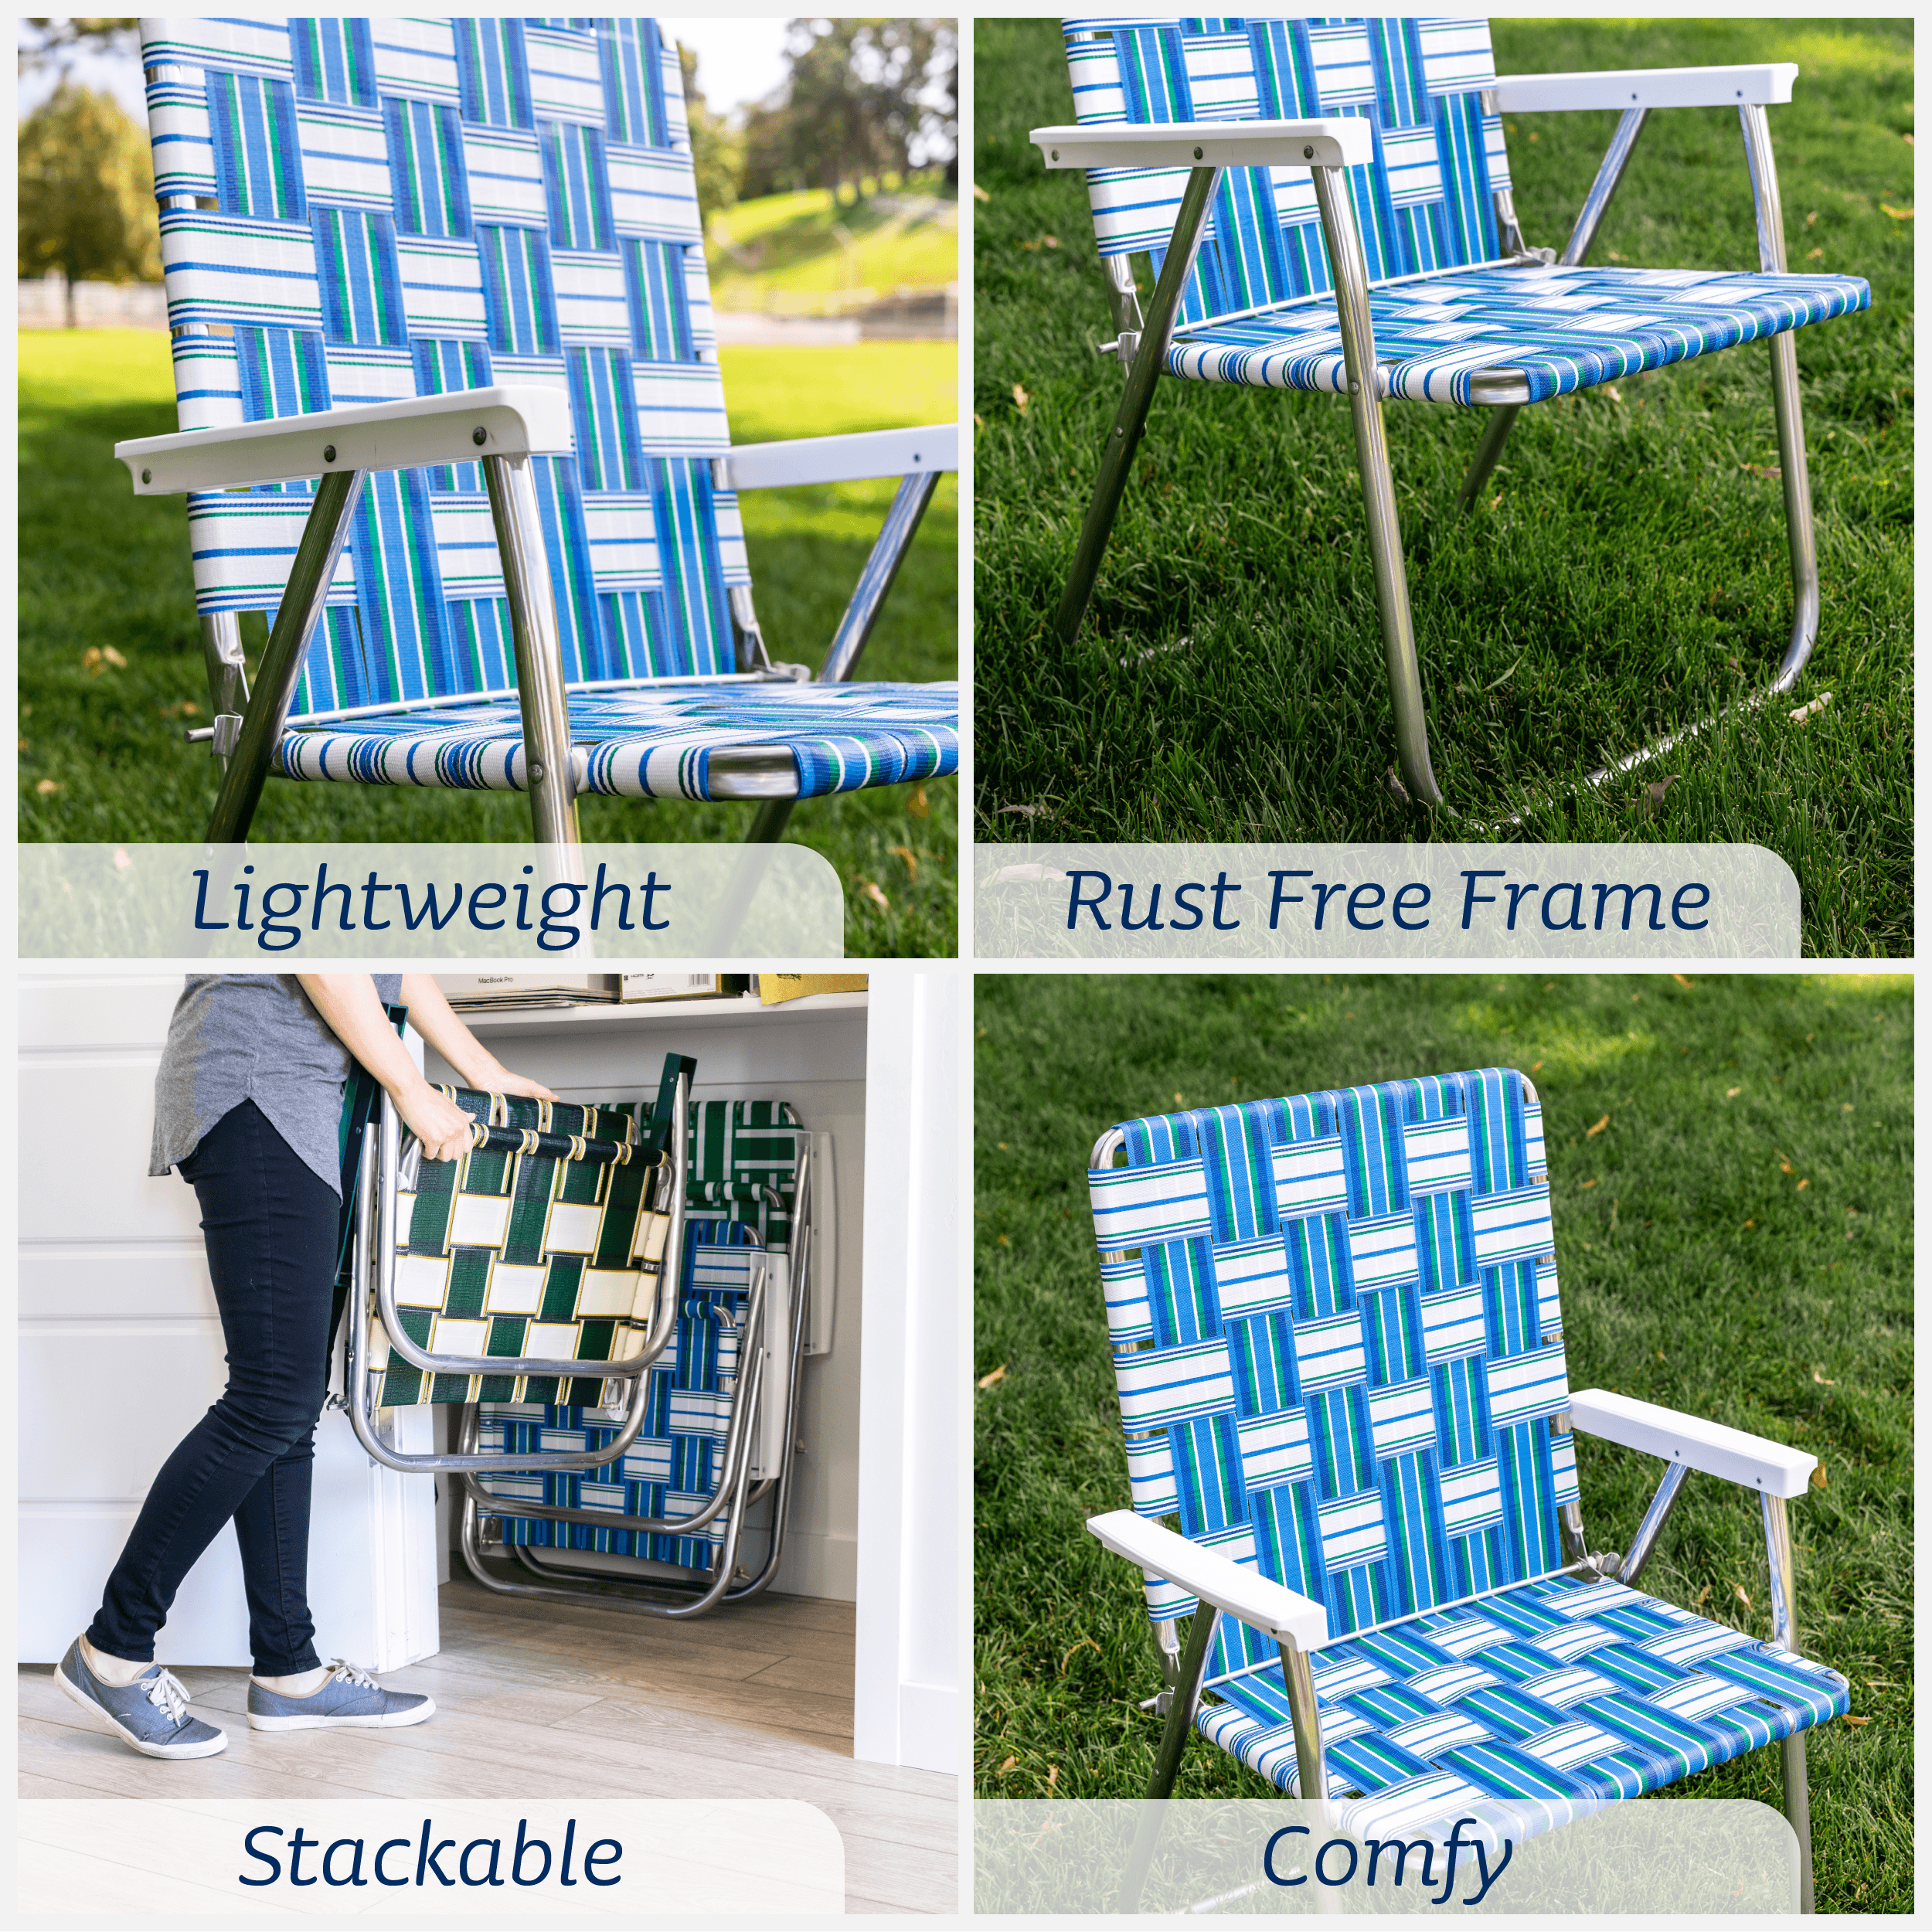 Lawn Chair USA Webbing Chair Magnum | Folding Aluminum Lawn Chair with UV-Resistant Webbing | For Camping | Sports and Beach | Old Glory with White Arms - image 5 of 7